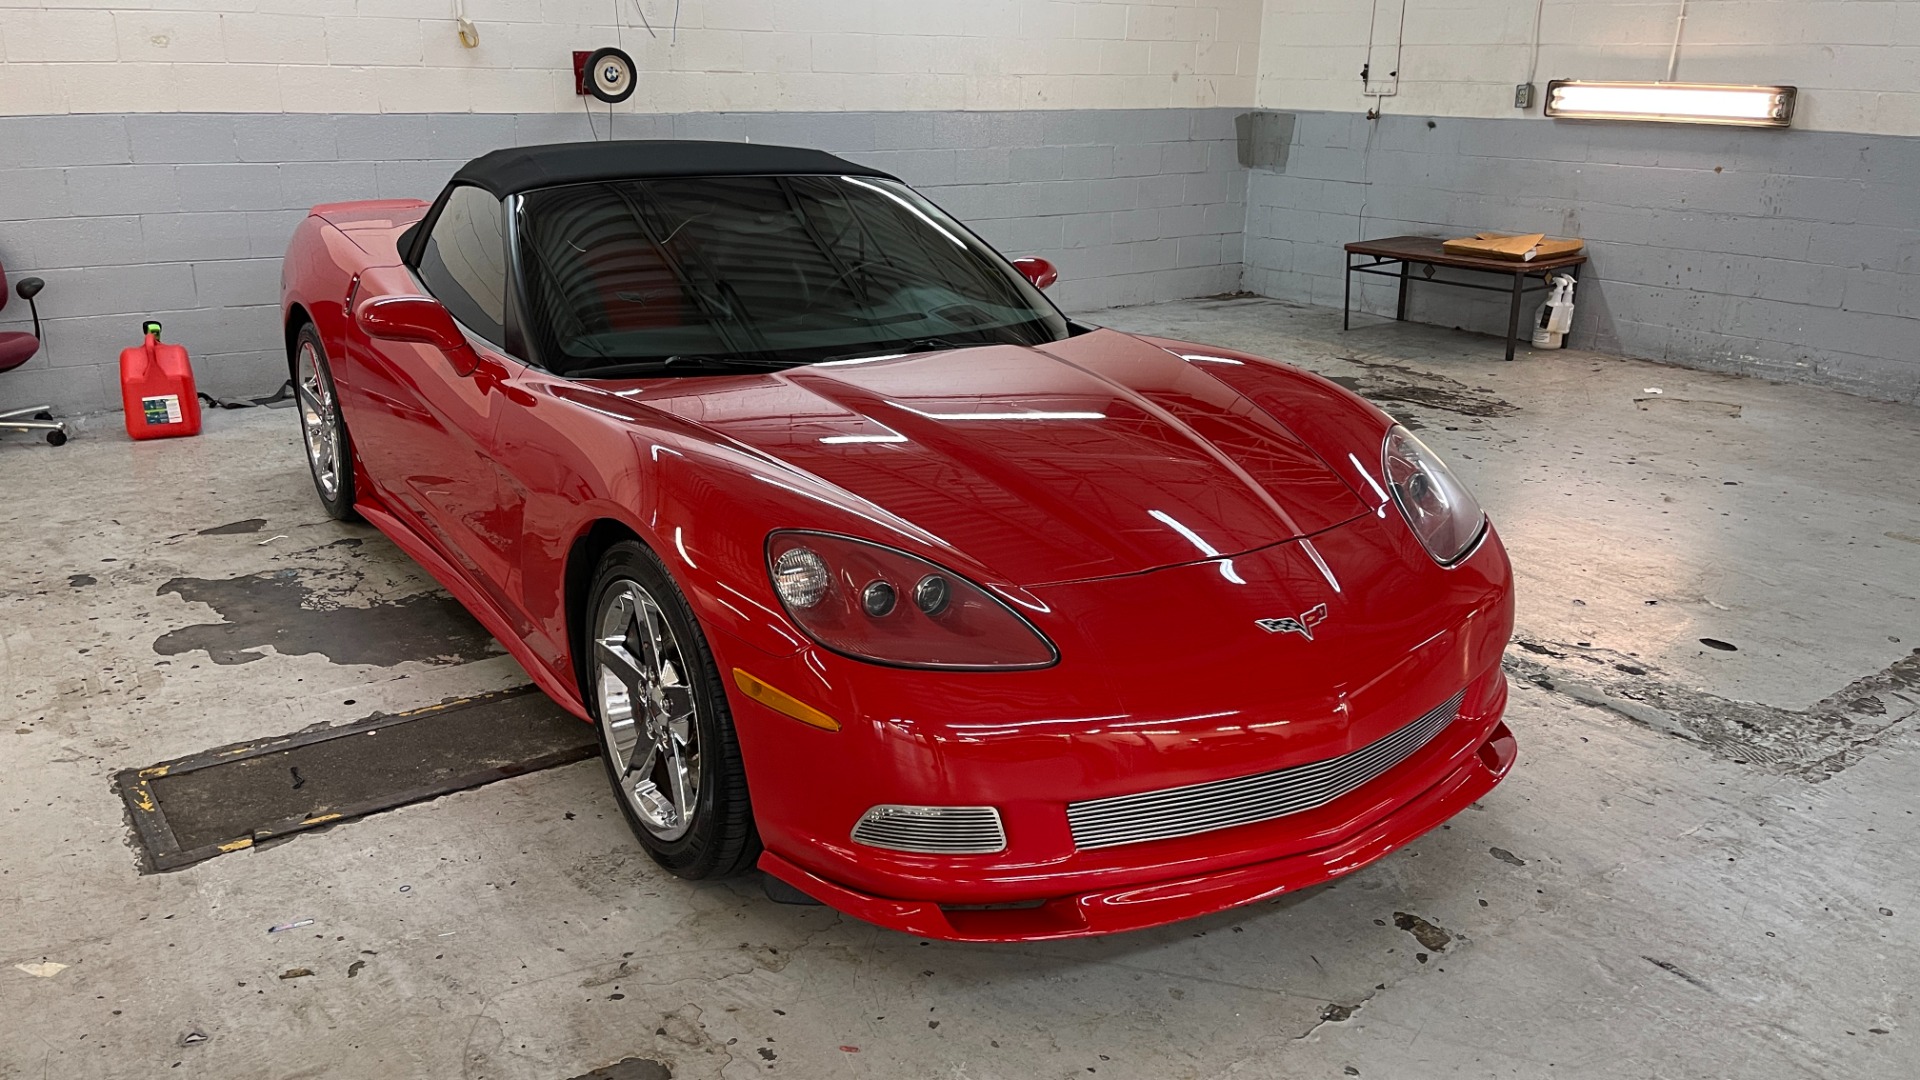 Used 2007 Chevrolet Corvette CONVERTIBLE / CORSA EXHAUST / CHROME WHEELS / LEATHER / AUTOMATIC for sale Sold at Formula Imports in Charlotte NC 28227 18